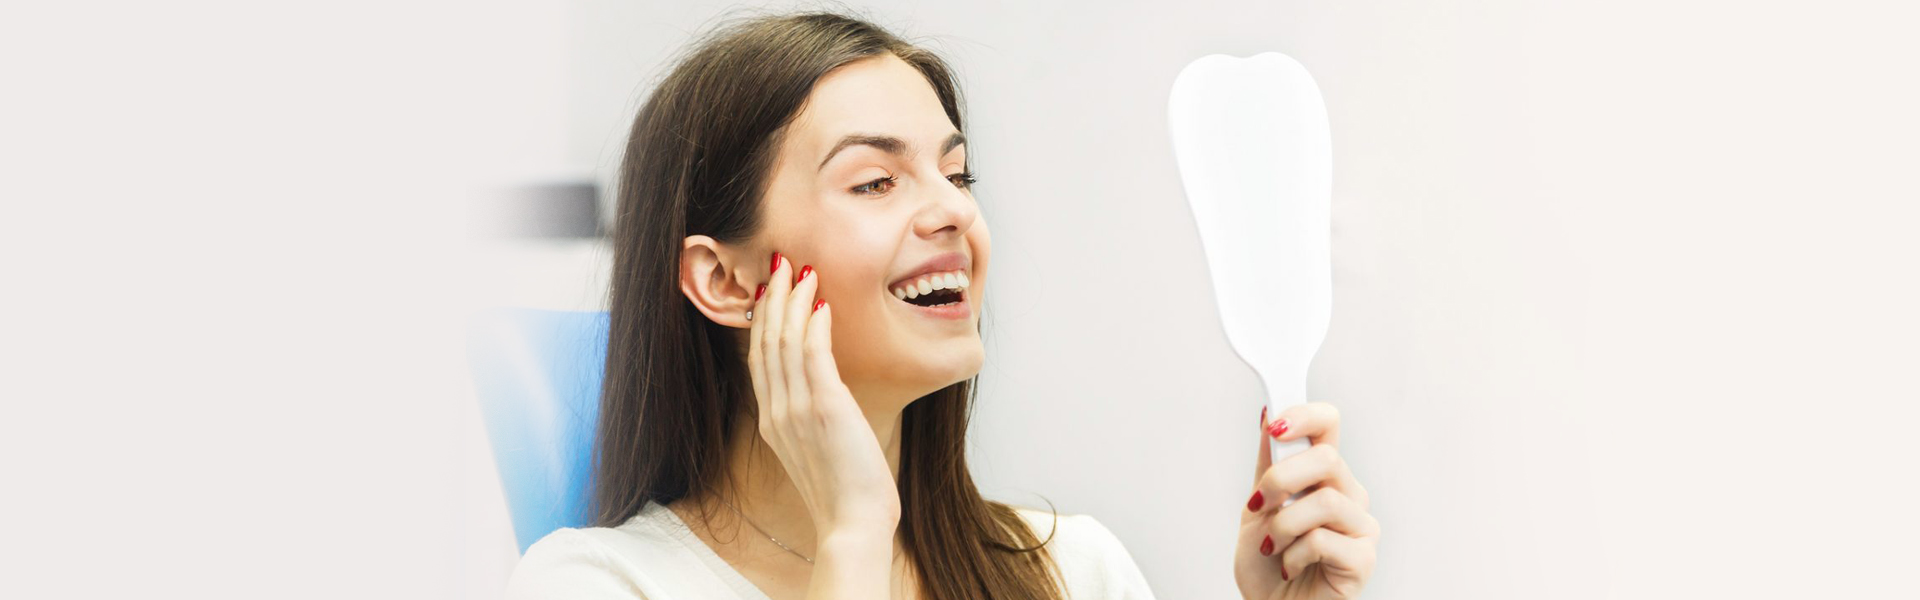 Benefit from Implant Dentistry If You Have Missing Teeth